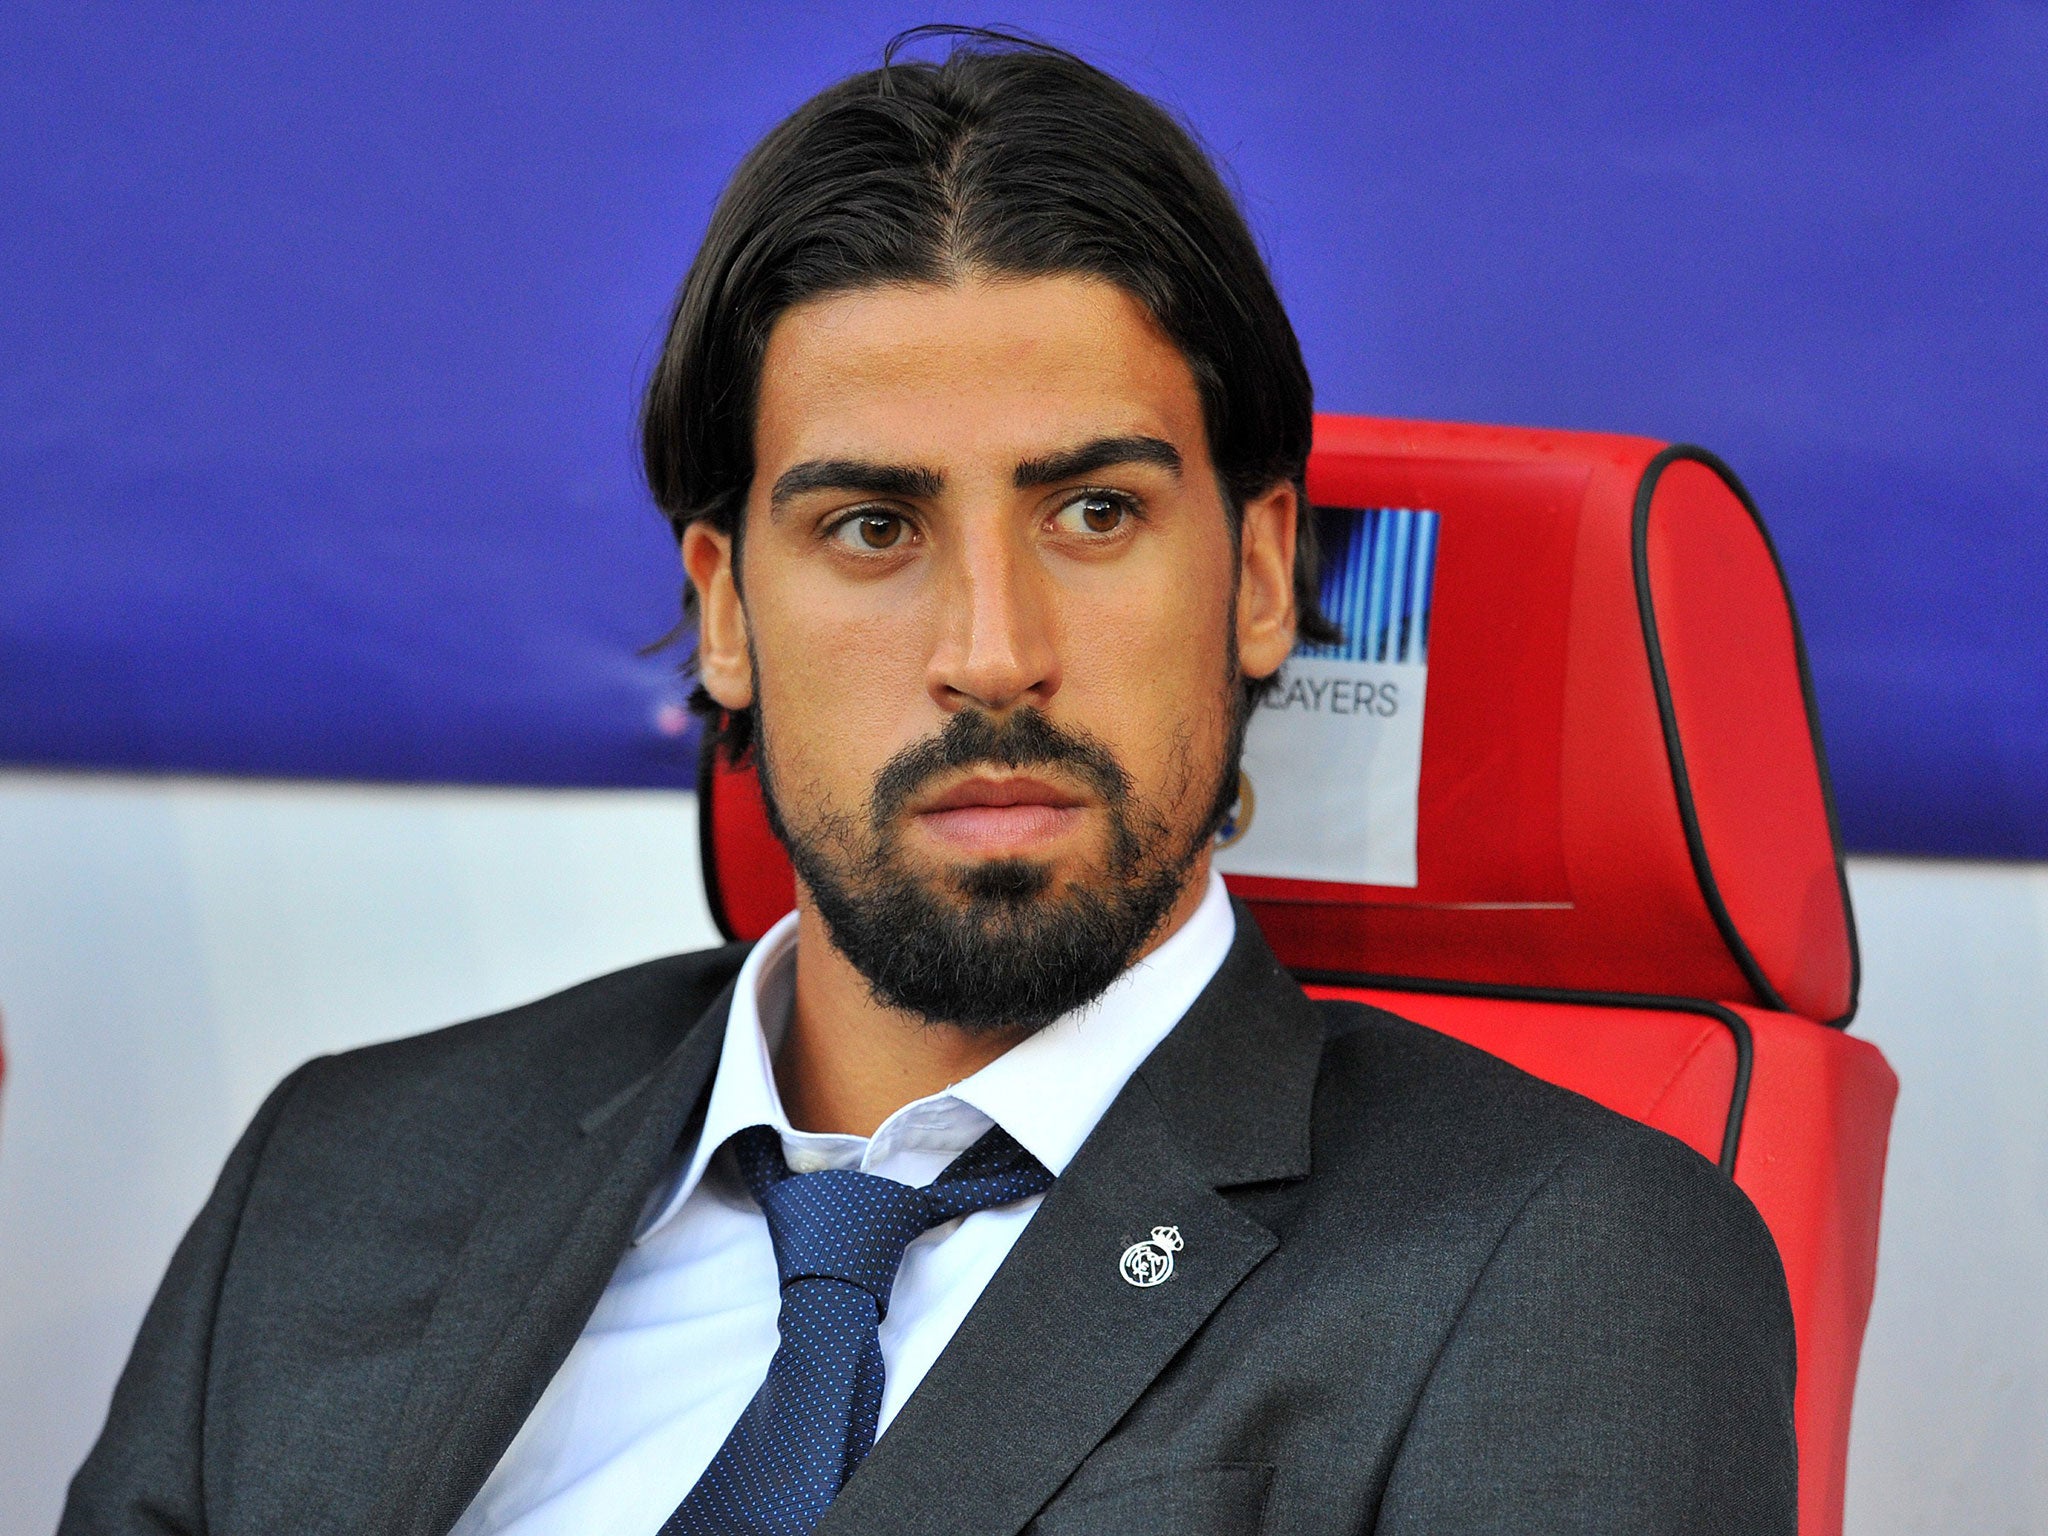 Real Madrid midfielder Sami Khedira has been left out of the Real Madrid team since August